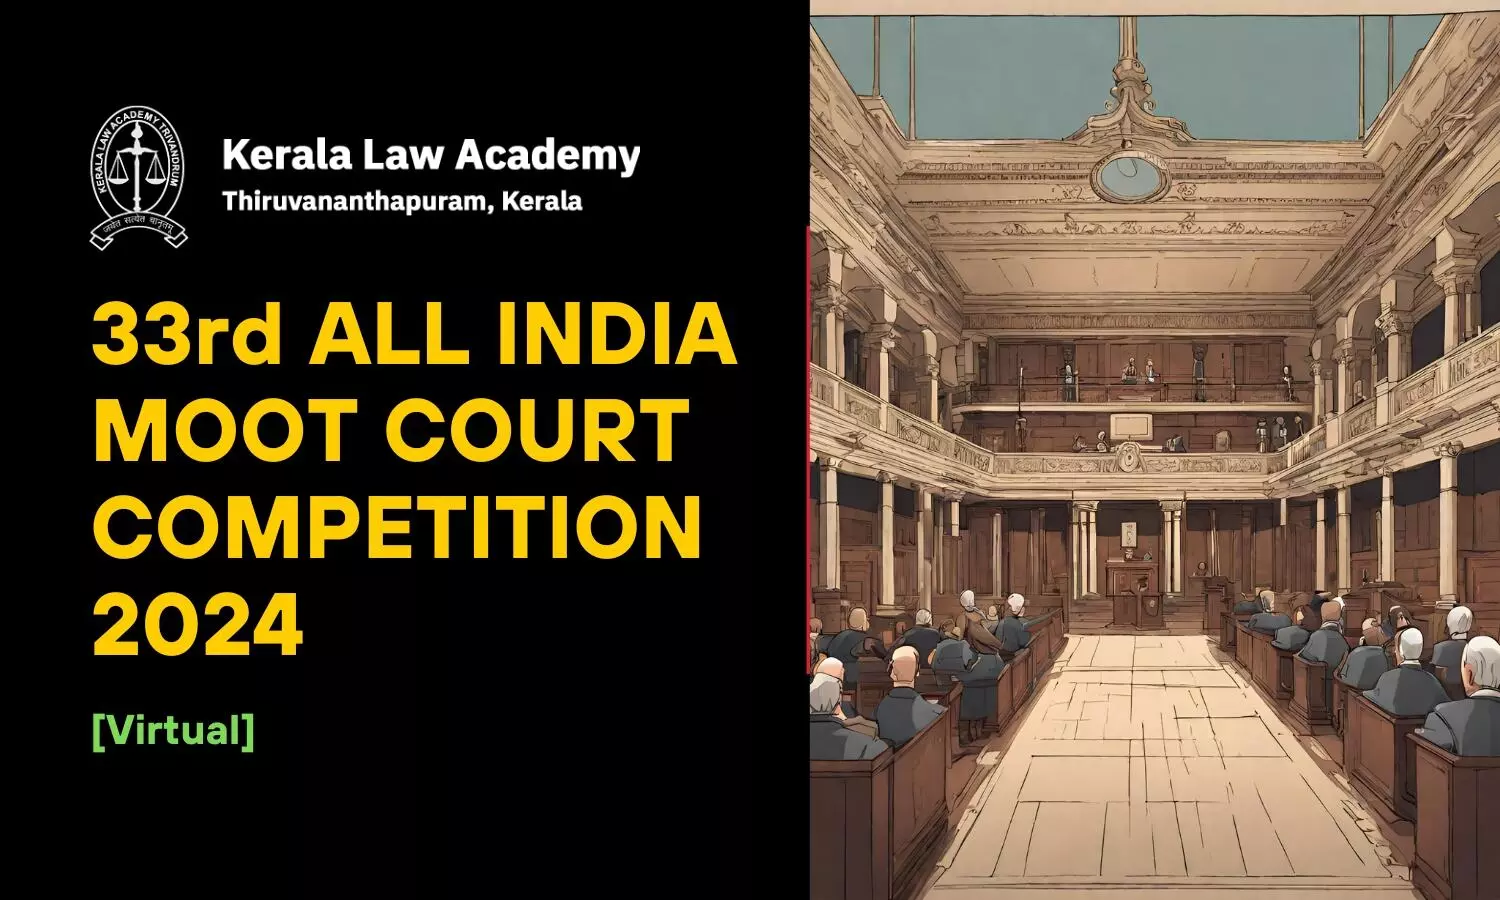 33rd All India Moot Court Competition 2024 | Kerala Law Academy